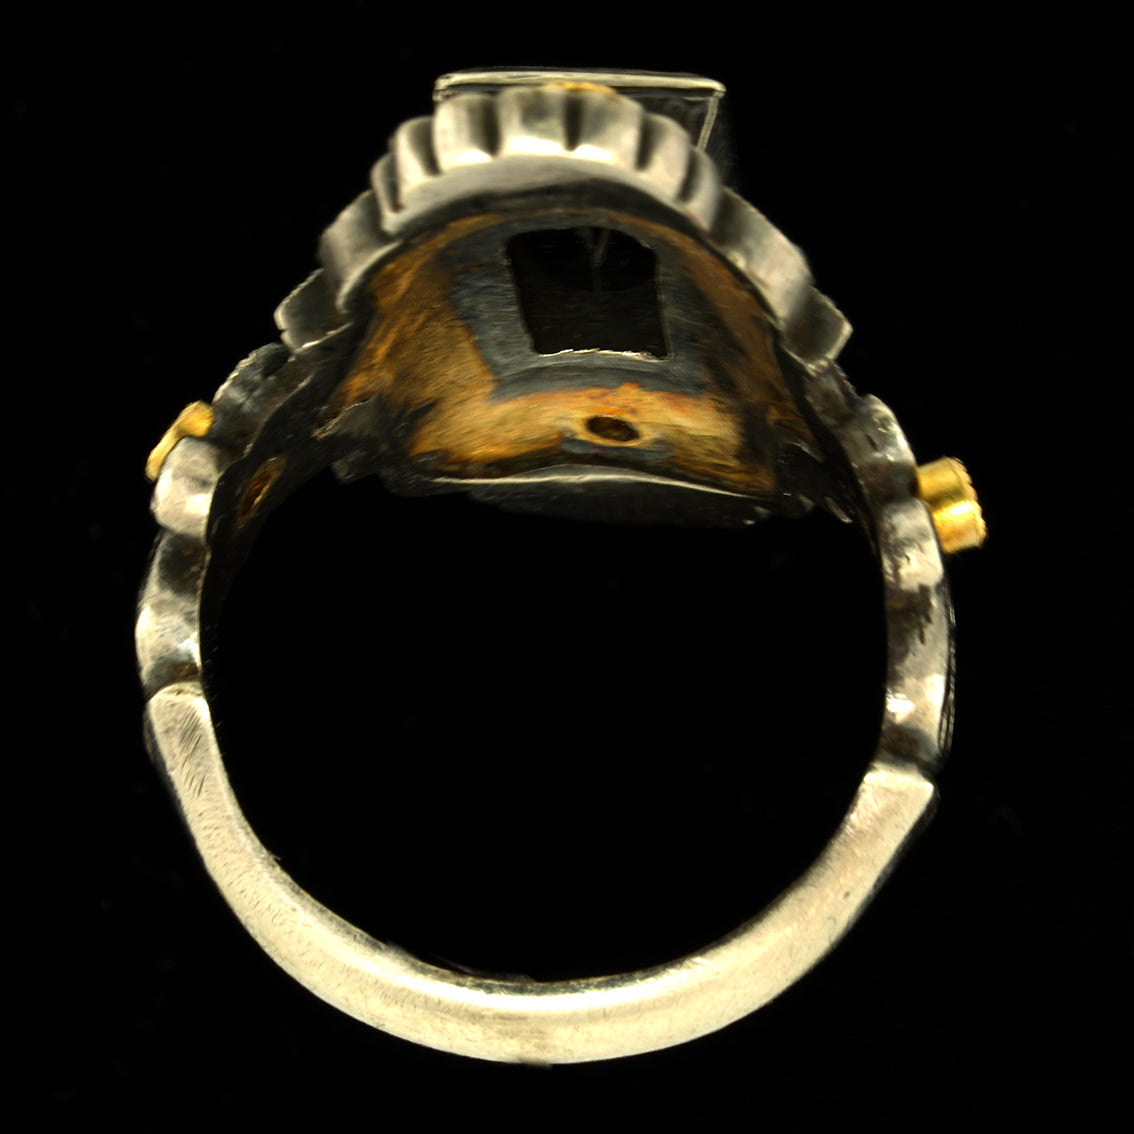 THE GOLDEN SHADOW RING